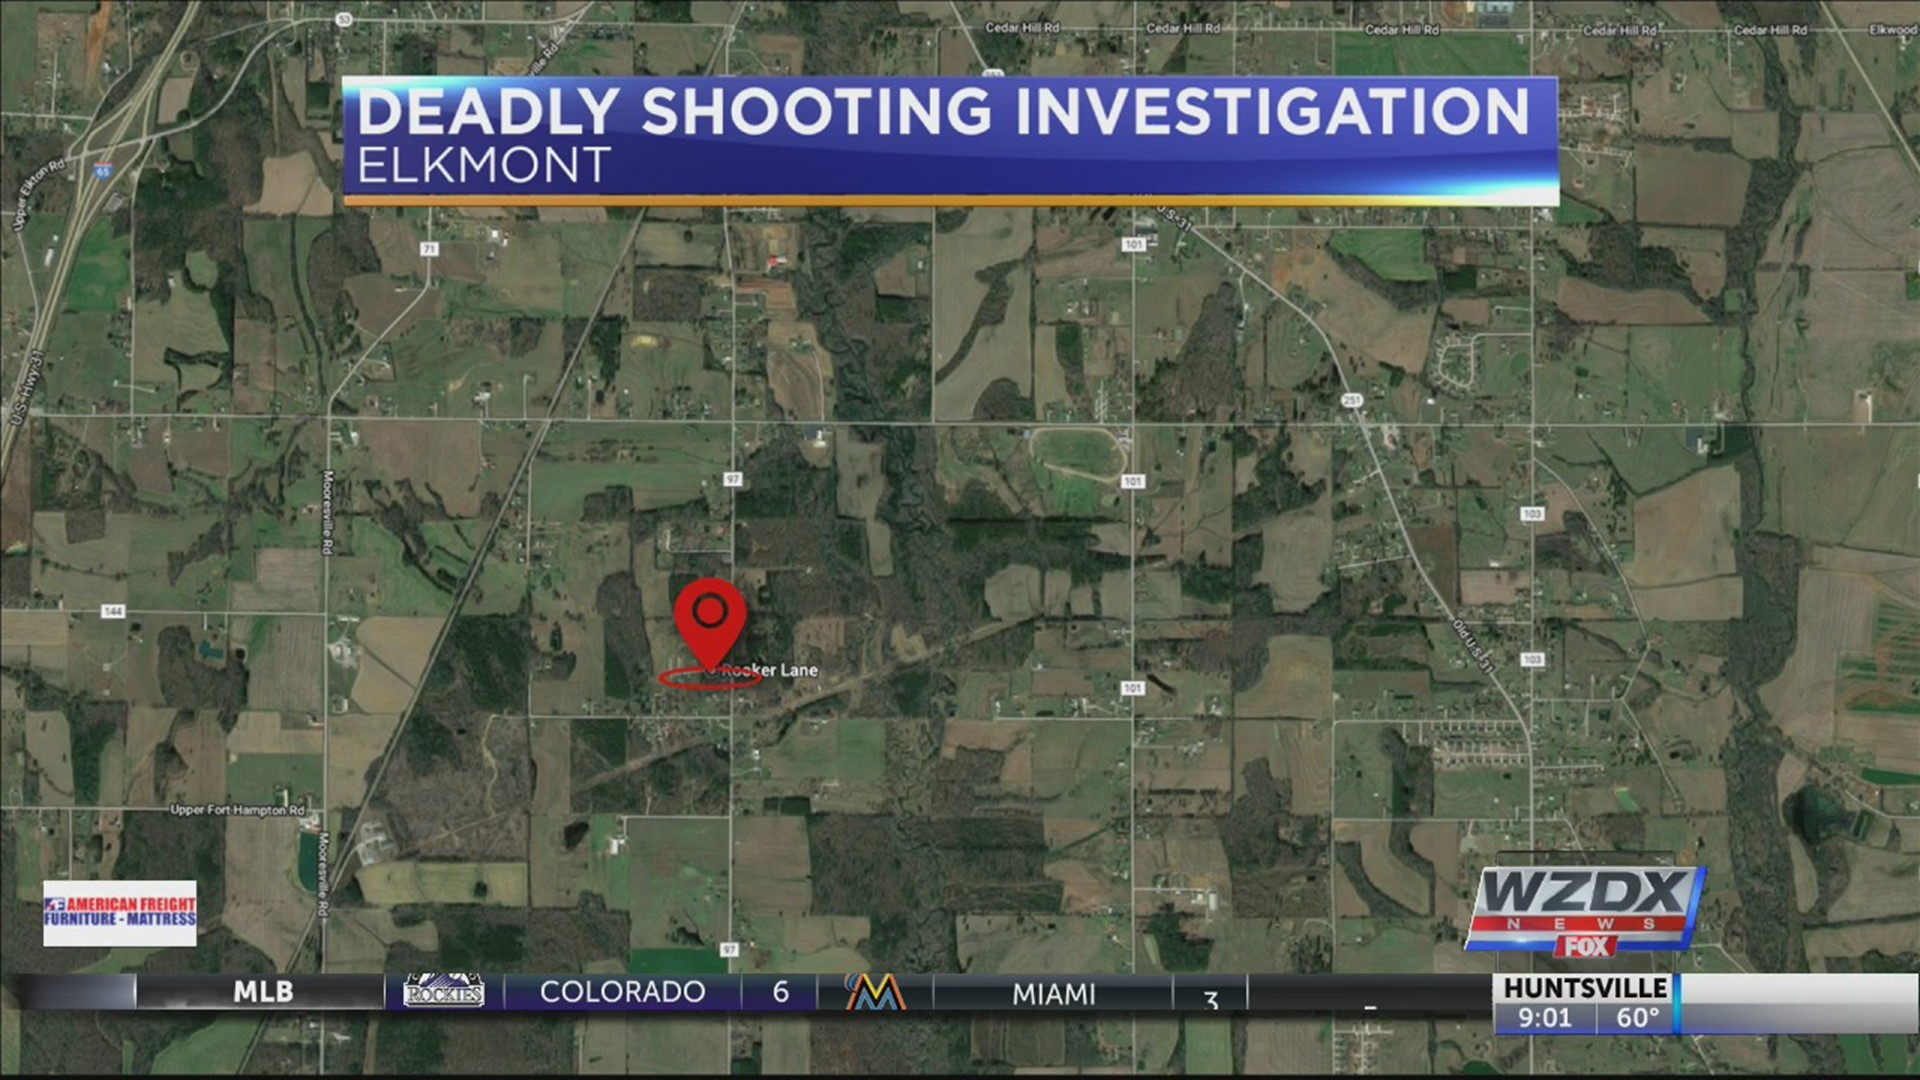 Limestone County Sheriff's deputies are investigating a deadly shooting.